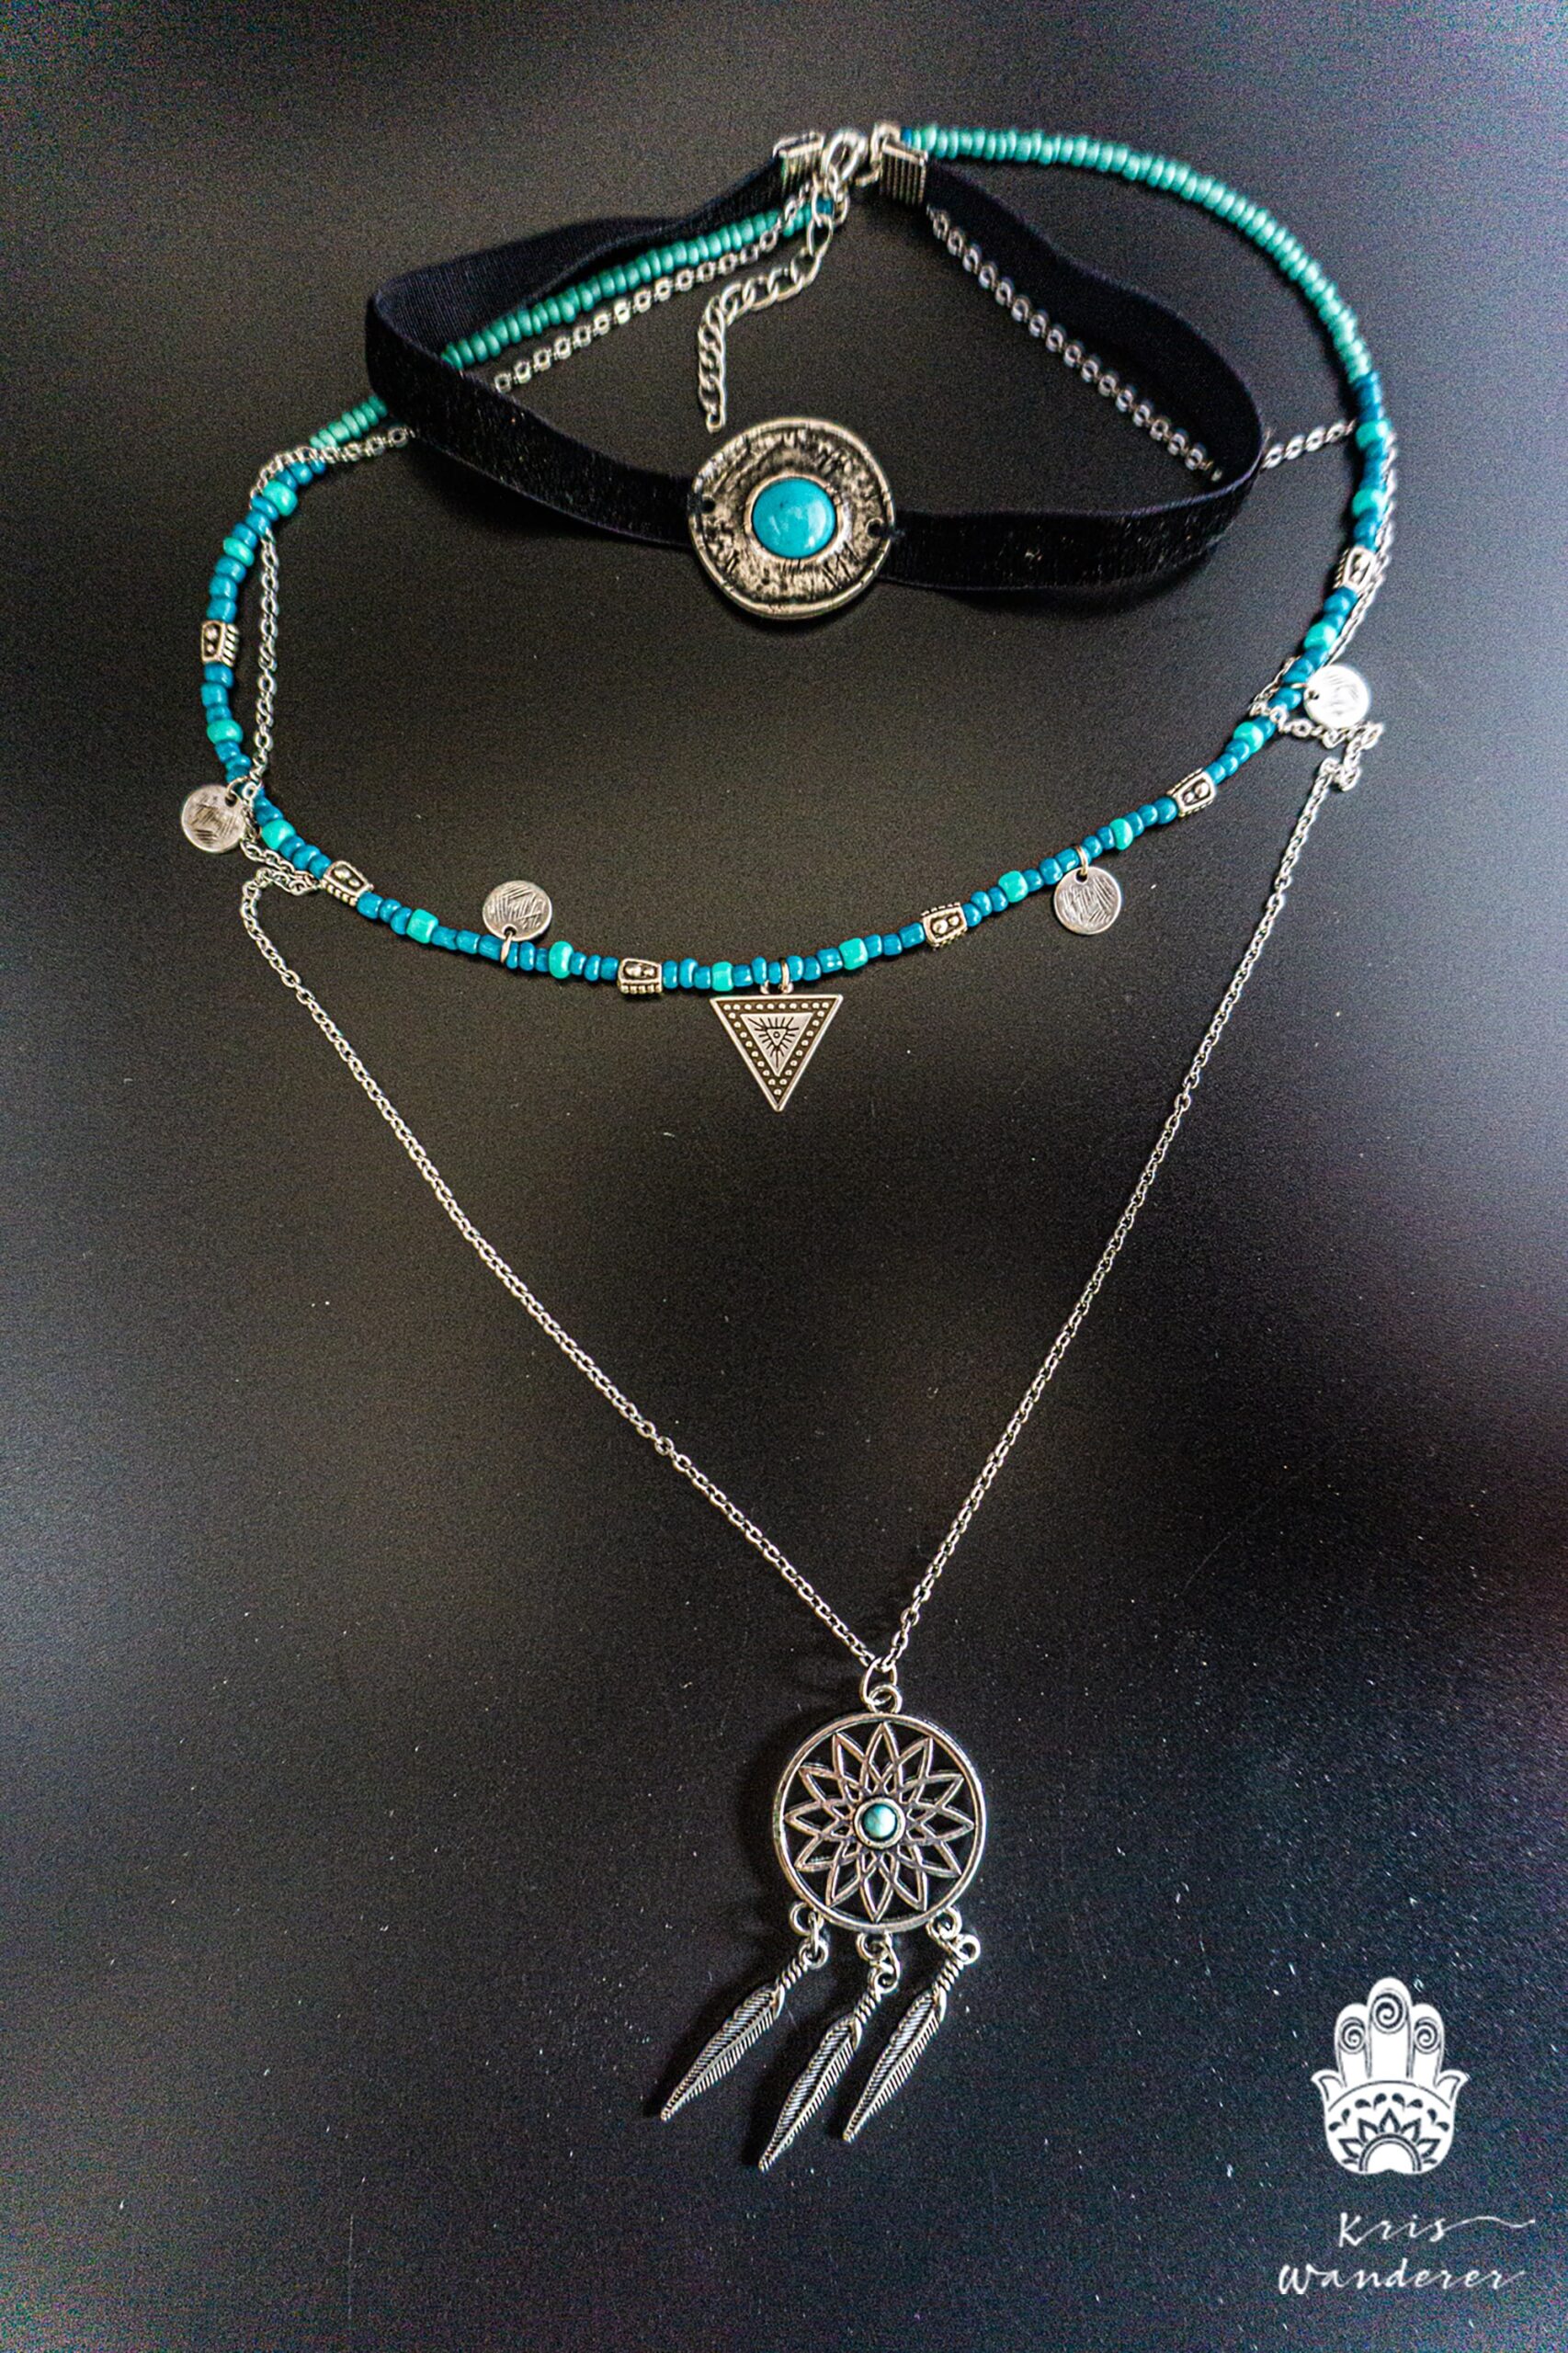 Statement Layered Necklace Set - Boho Chic Choker Necklace - Dream Catcher Long Pendant Necklace - Turquoise Beaded Stacking Necklace- wanderjewellery by kriswanderer